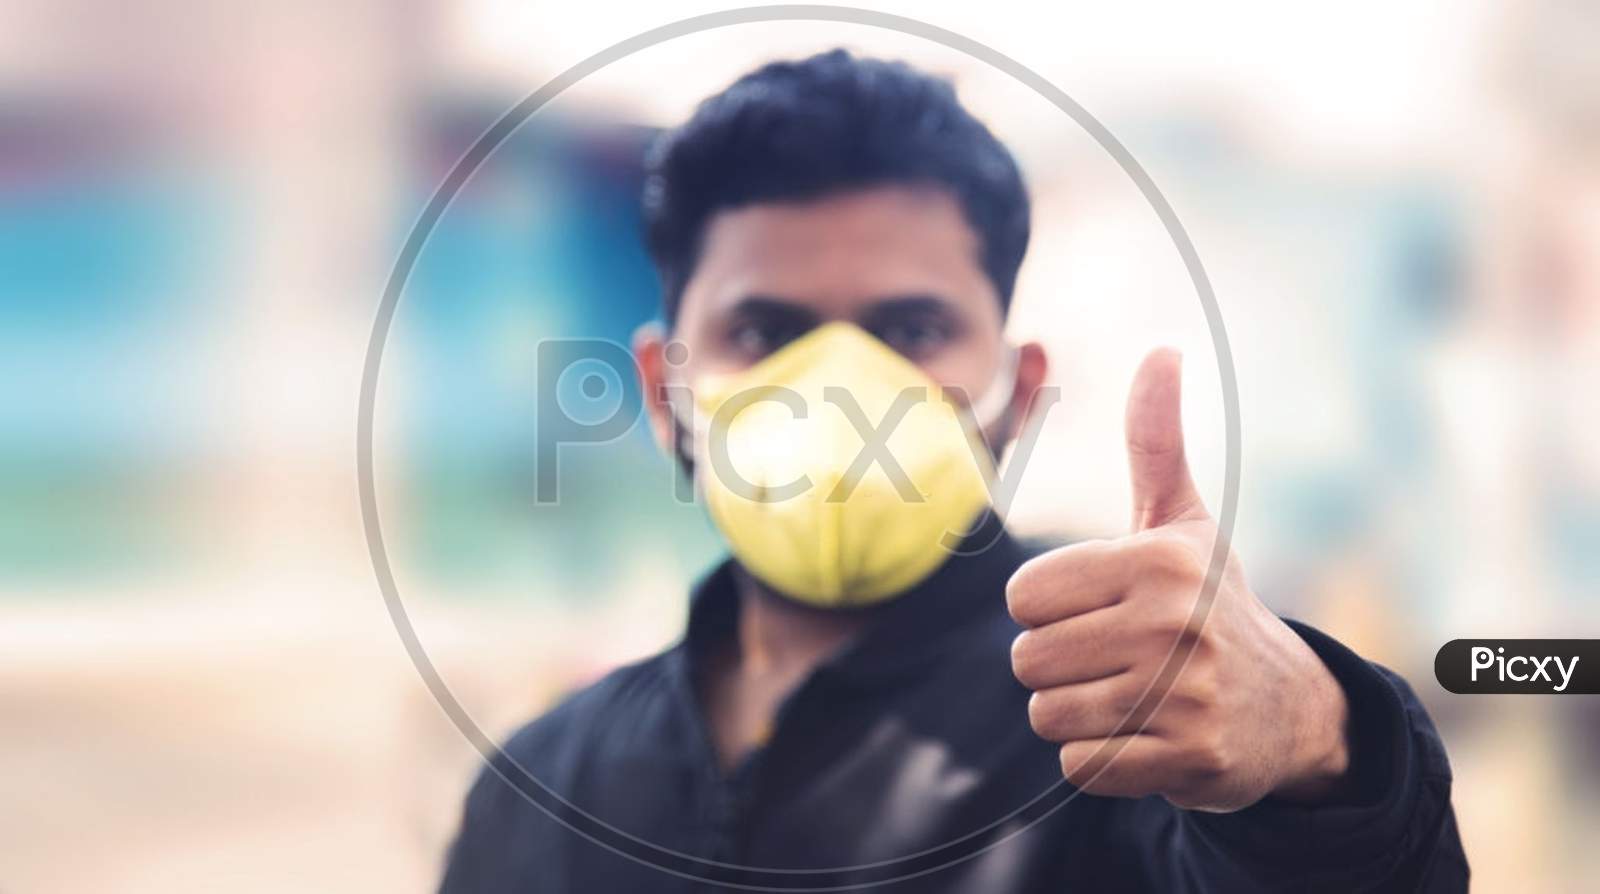 Man Covering His Face With Pollution Mask For Protection From Viruses During Corona Virus And Flu Outbreak. Virus And Illness Protection